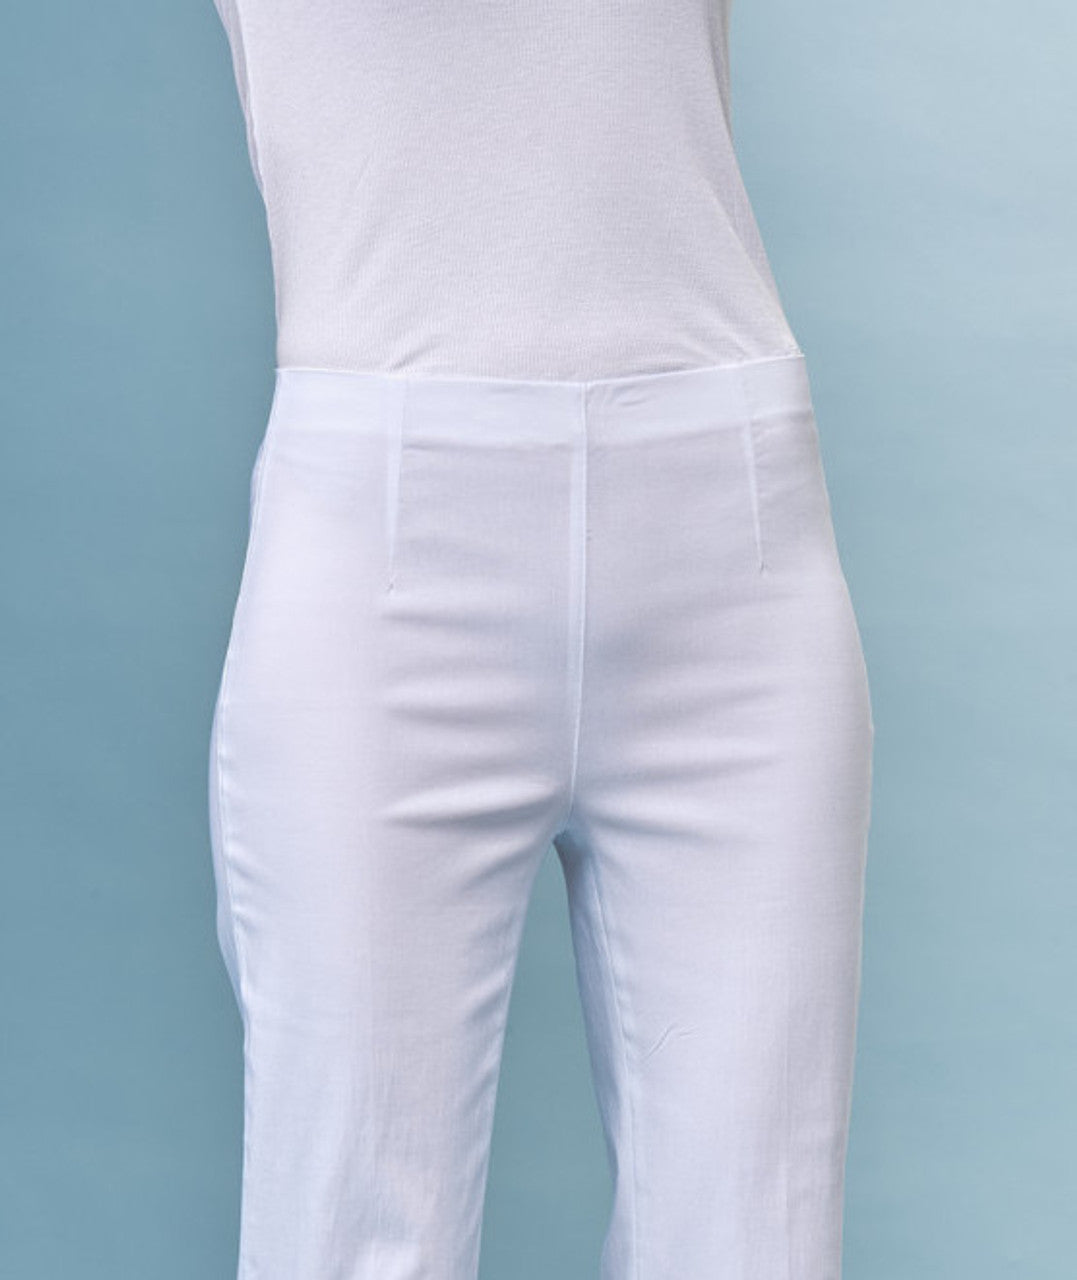 Button Side Trimmed Solid Capris